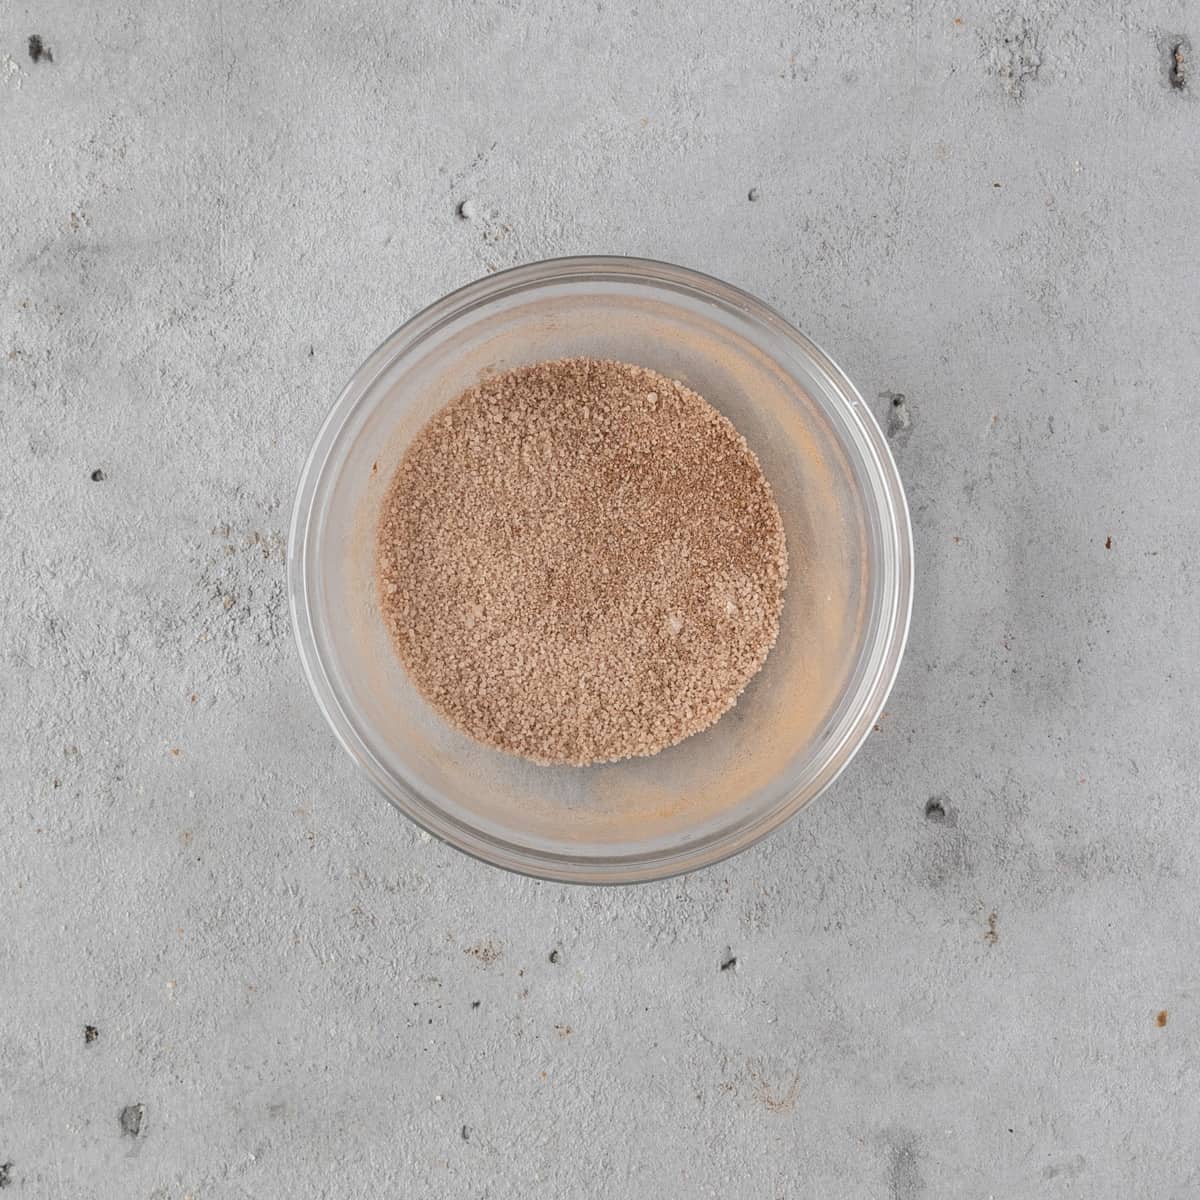 the cinnamon and sugar combined in a glass bowl on a grey background